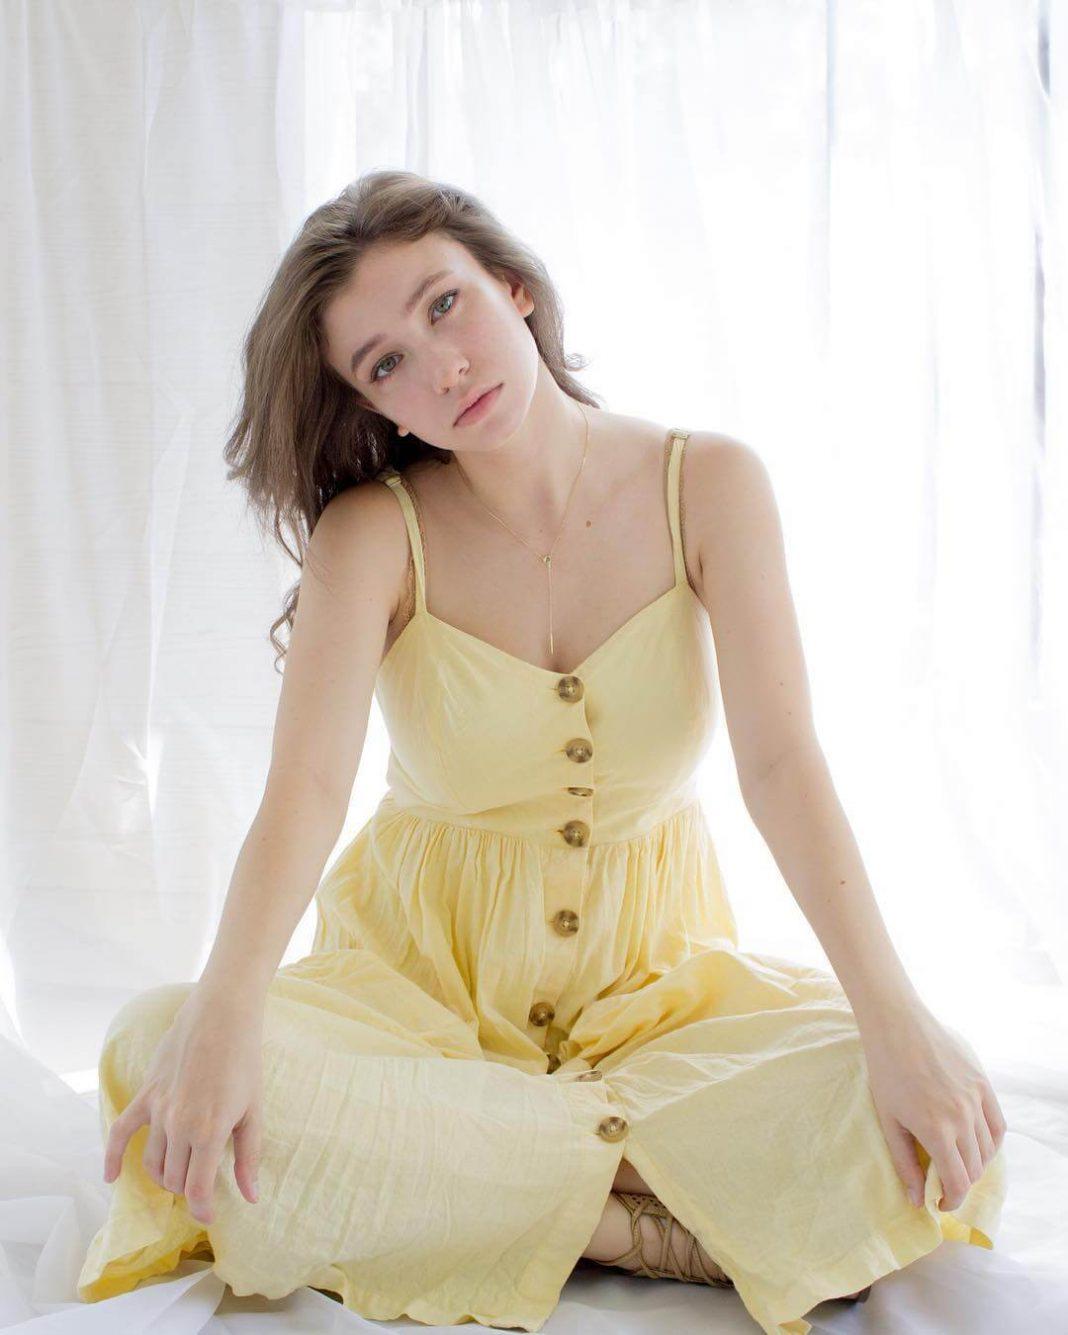 Katelyn Nacon Nude Pictures Which Prove Beauty Beyond Recognition